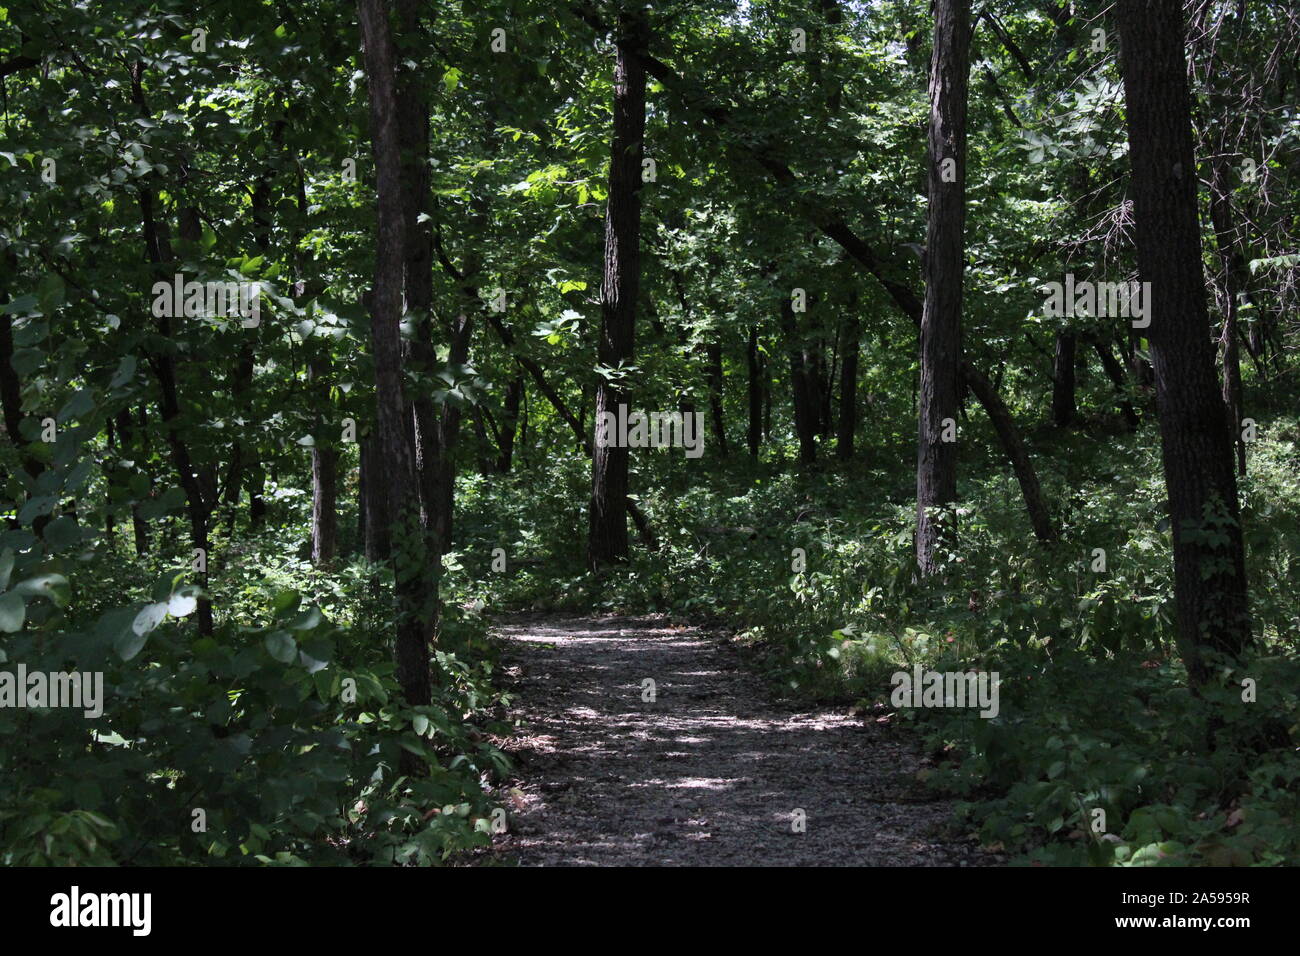 A forest photo in Winterset's City Park with dappled sunlight filtering through the tree canopy. Stock Photo